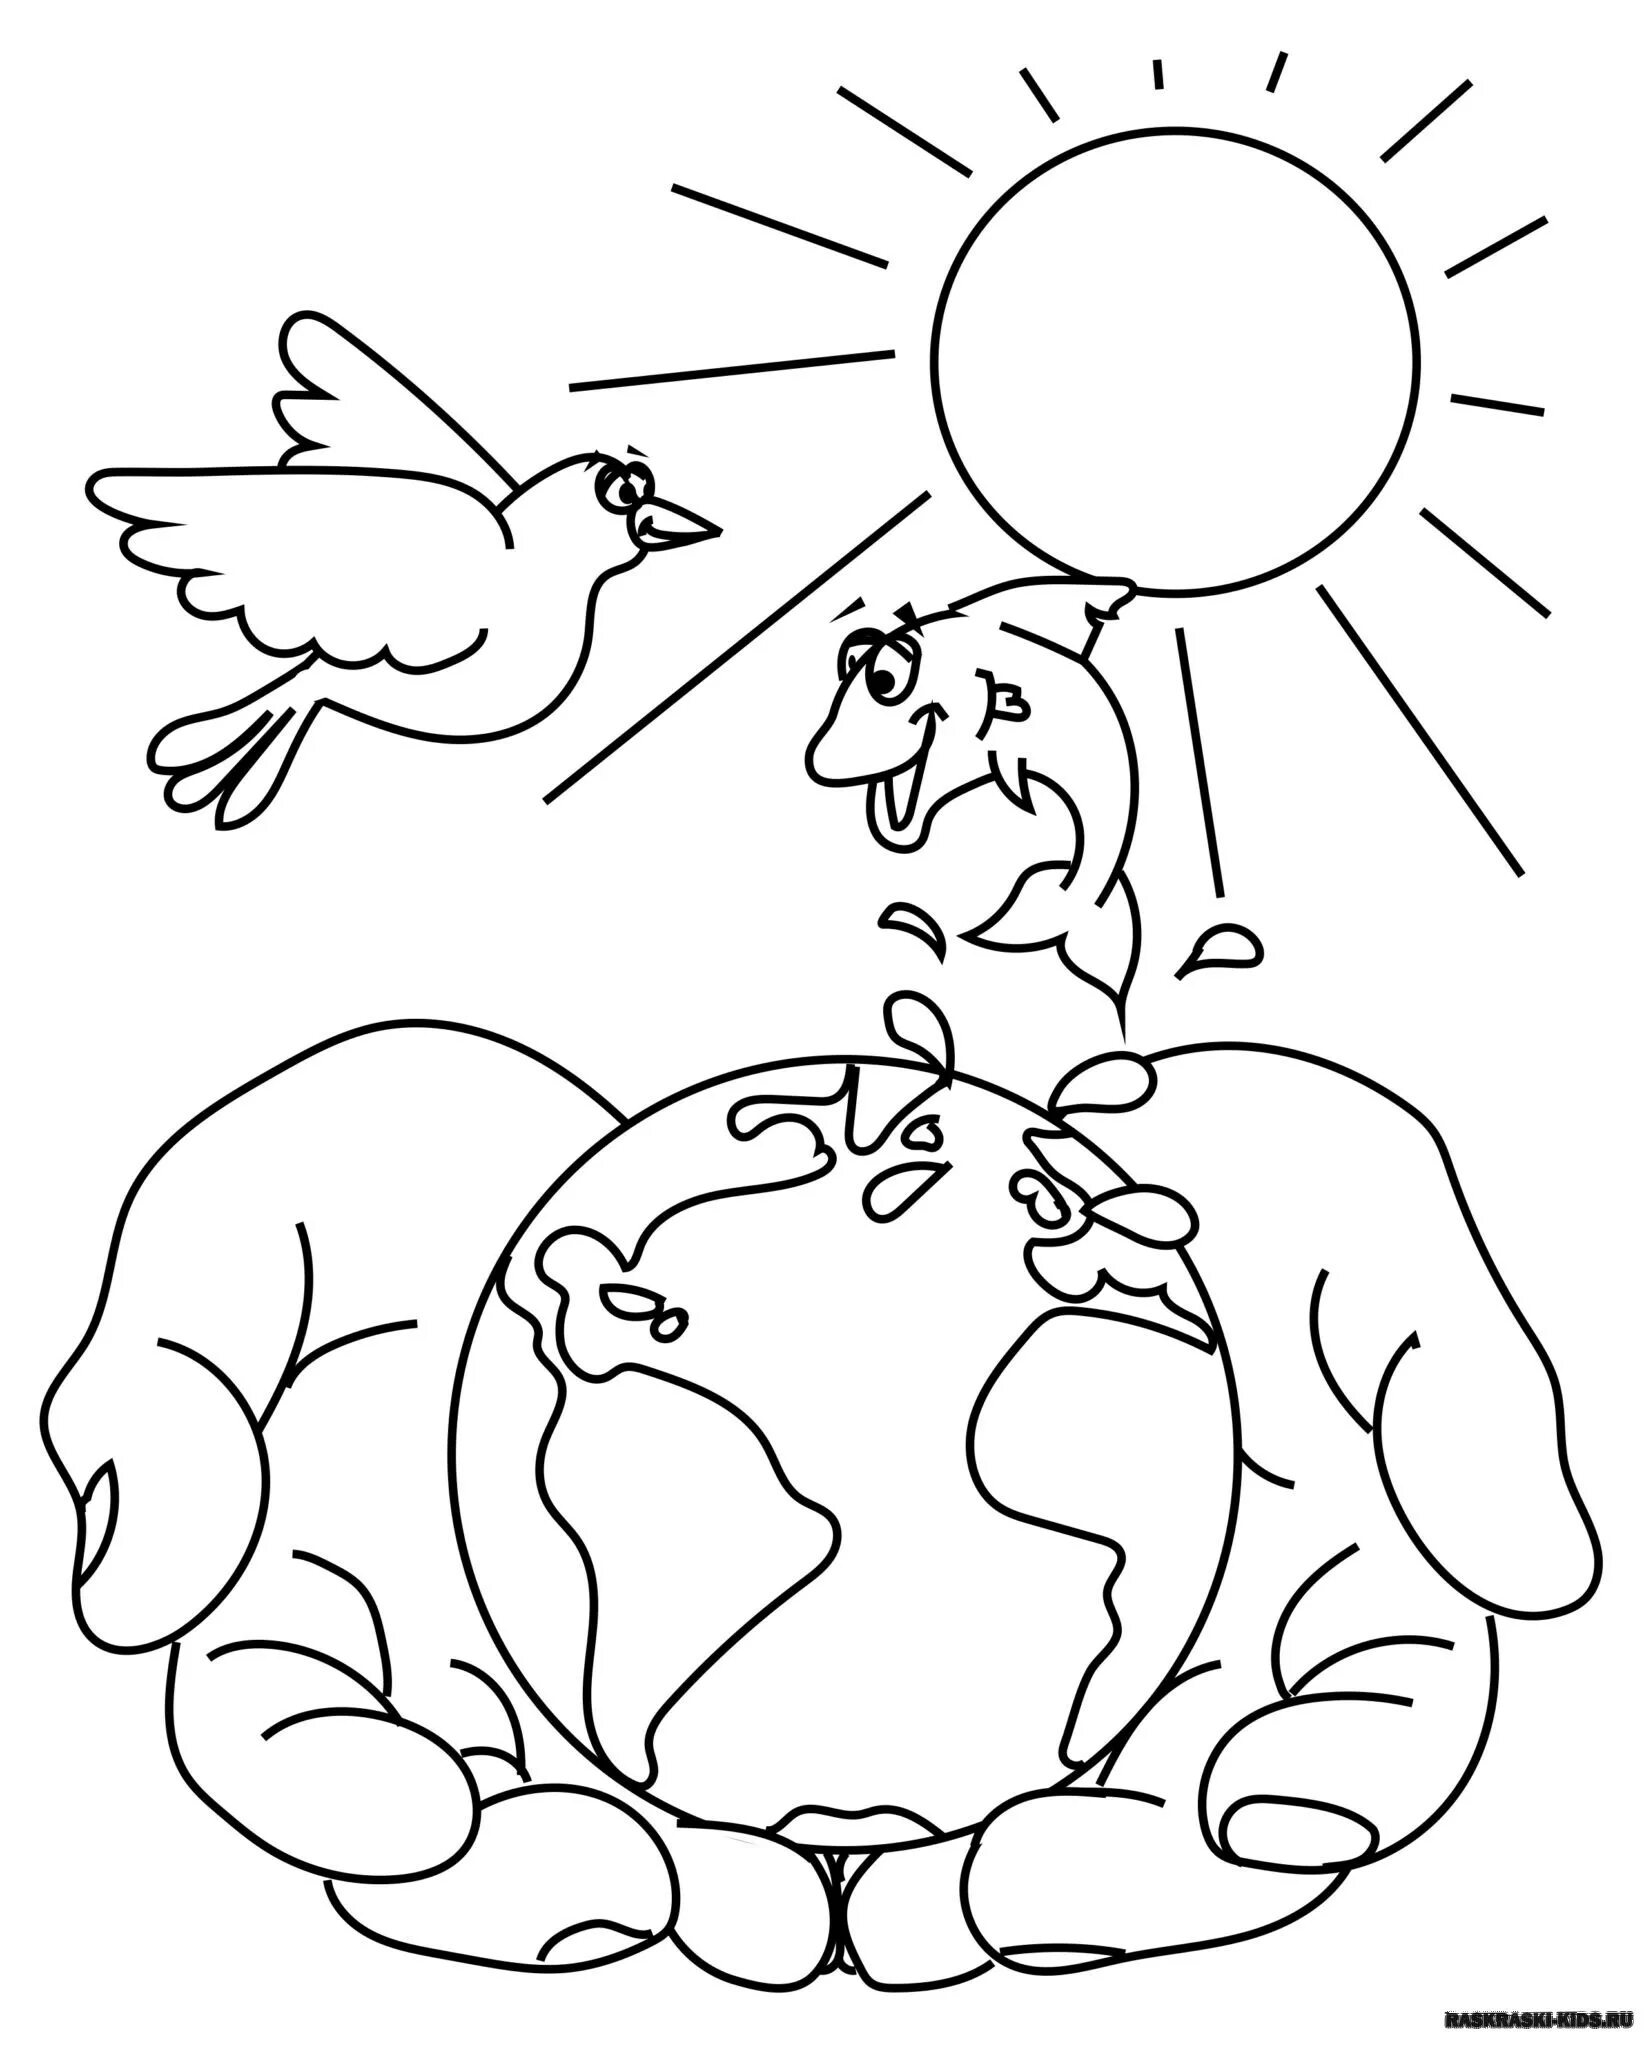 About peace on earth through the eyes of children #5